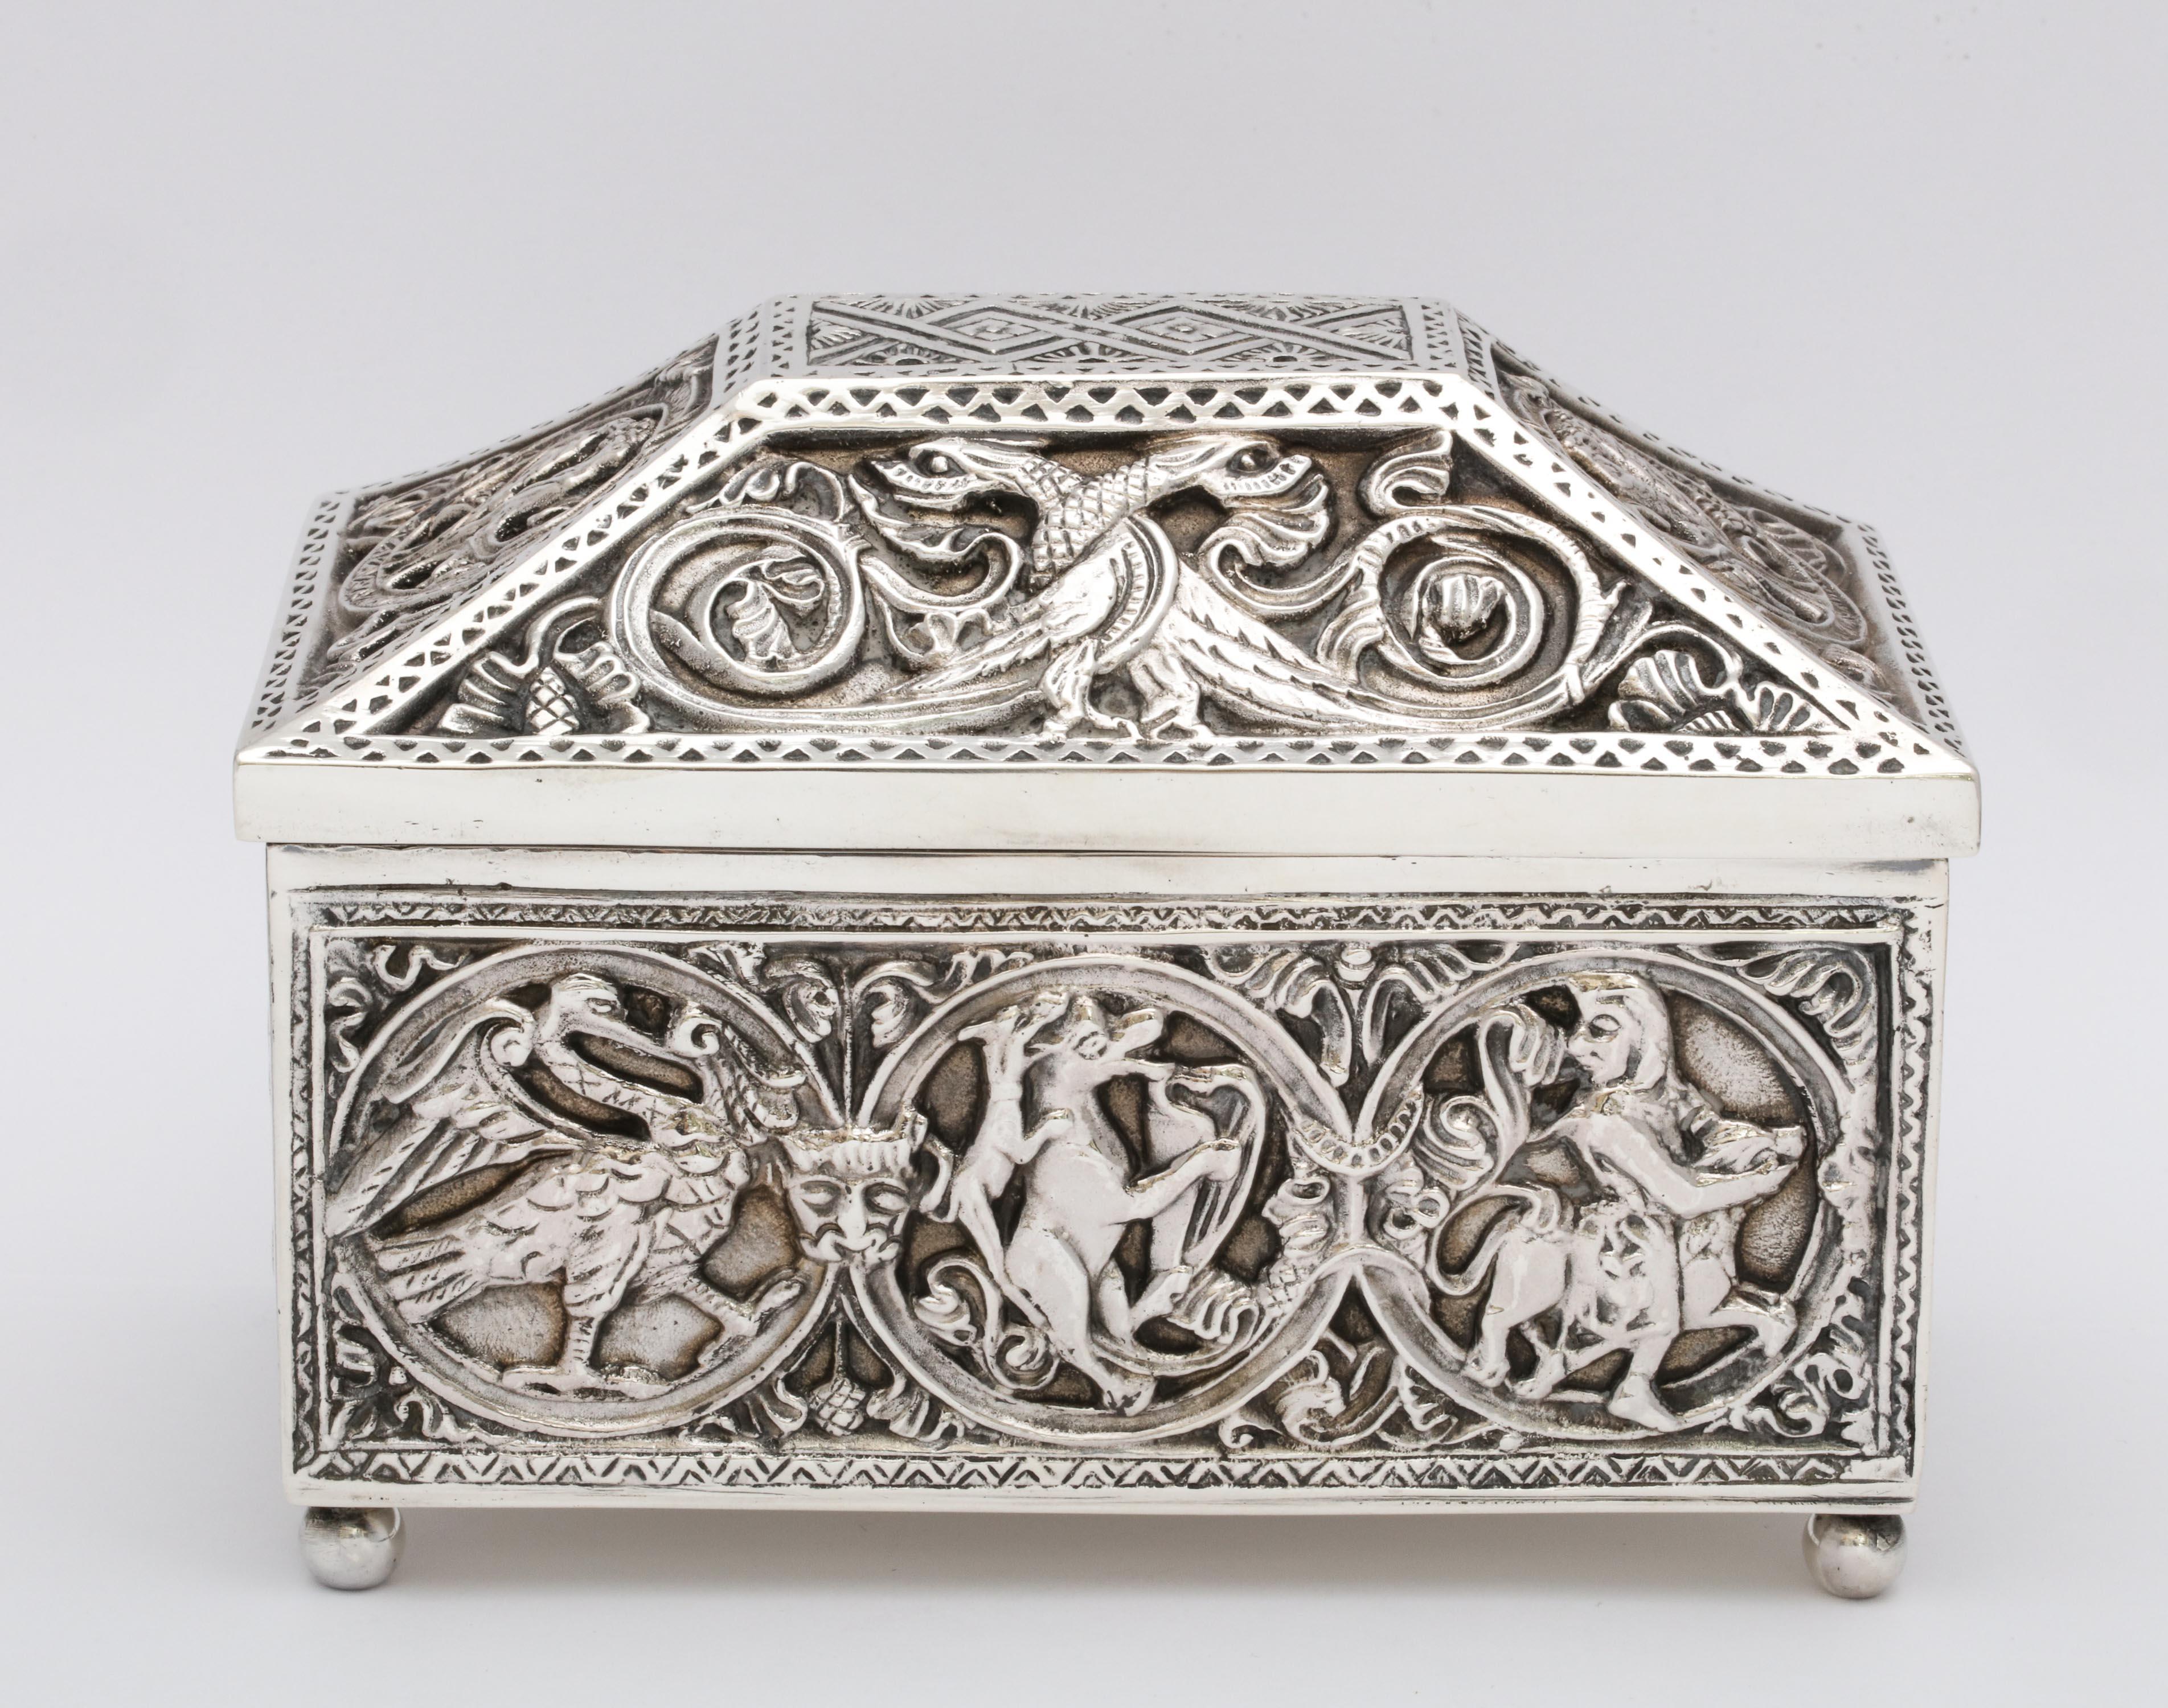 Medieval-style, sterling silver (.950) casket - form jewelry box with hinged lid, having bun feet, Paris, circa 1900. Suede lined. Designed with mythical birds and scenes. Measures 4 3/4 inches high (at highest point) x 6 inches wide x 3 3/4 inches